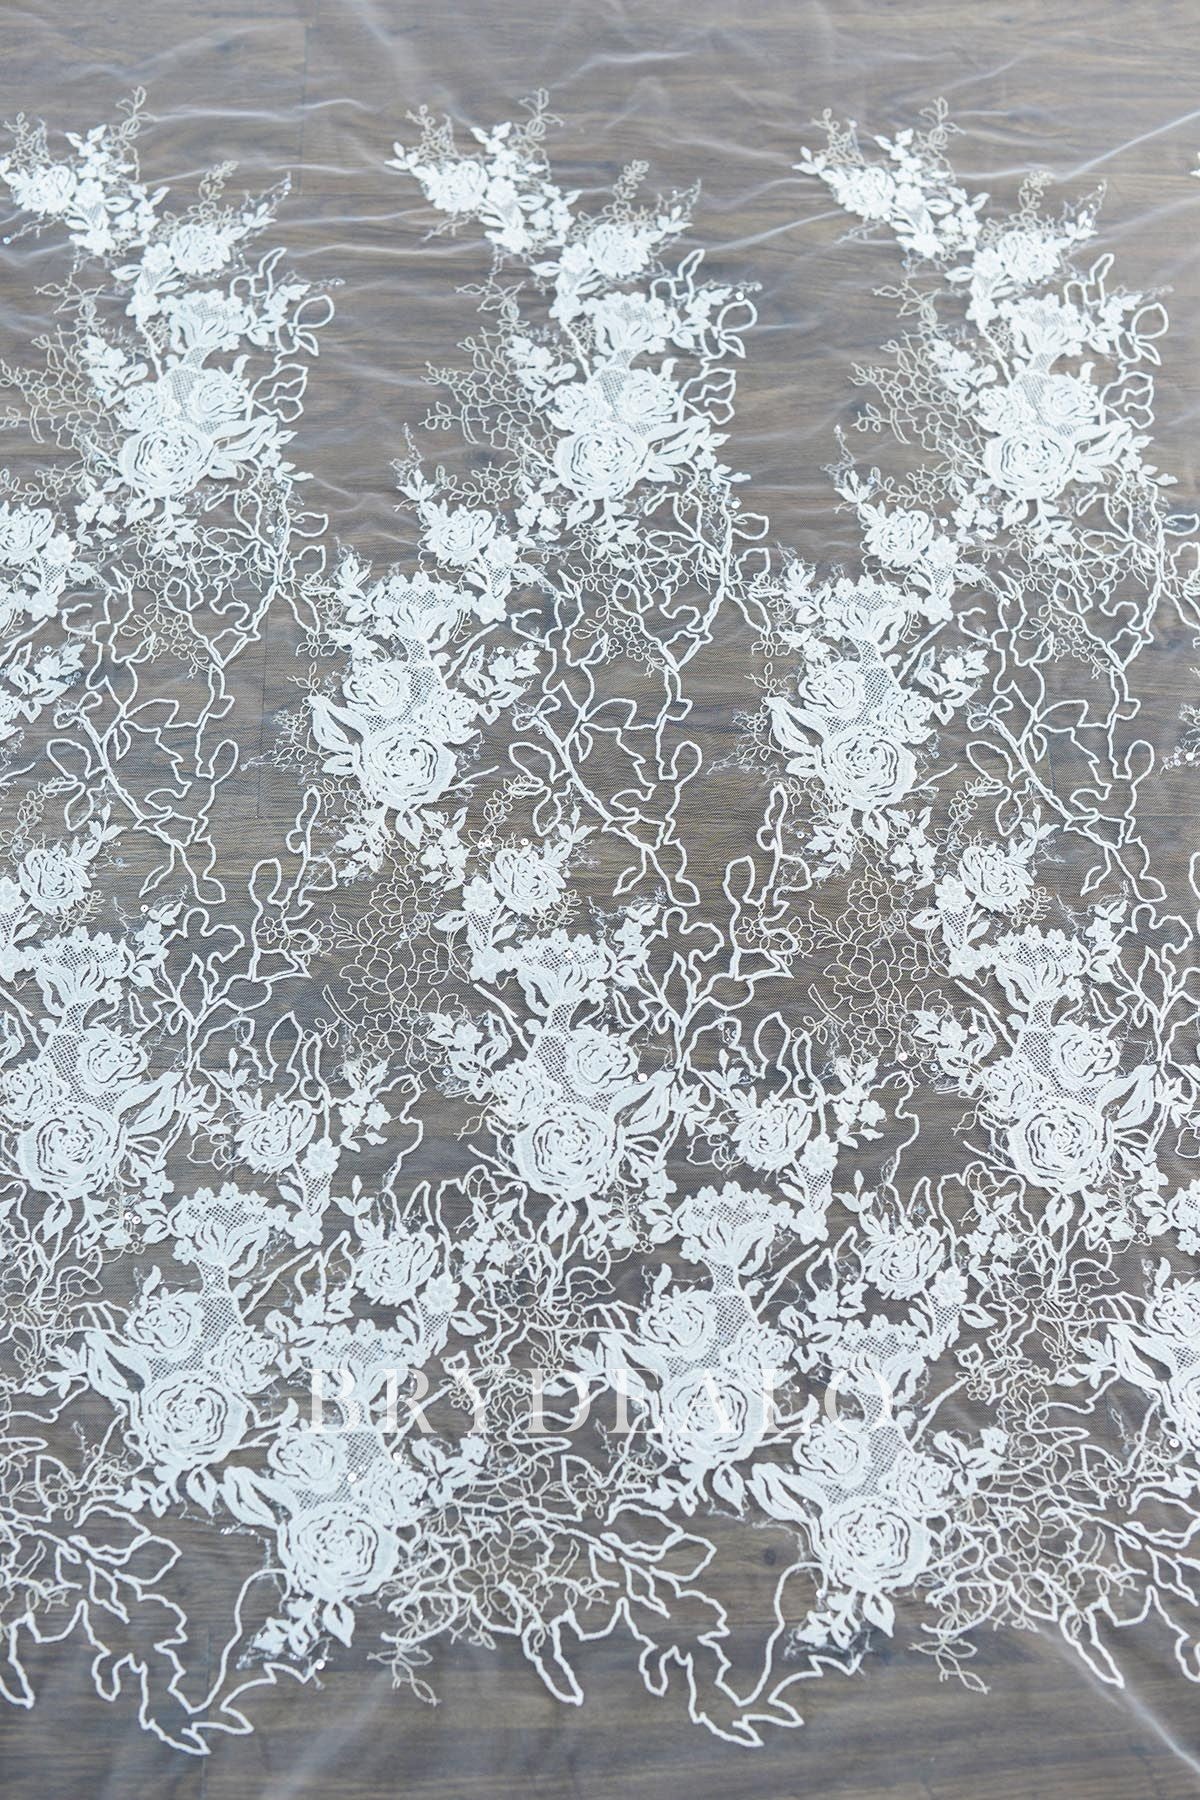 Shimmery Designer Growing Rosa Lace Fabric for Wholesale